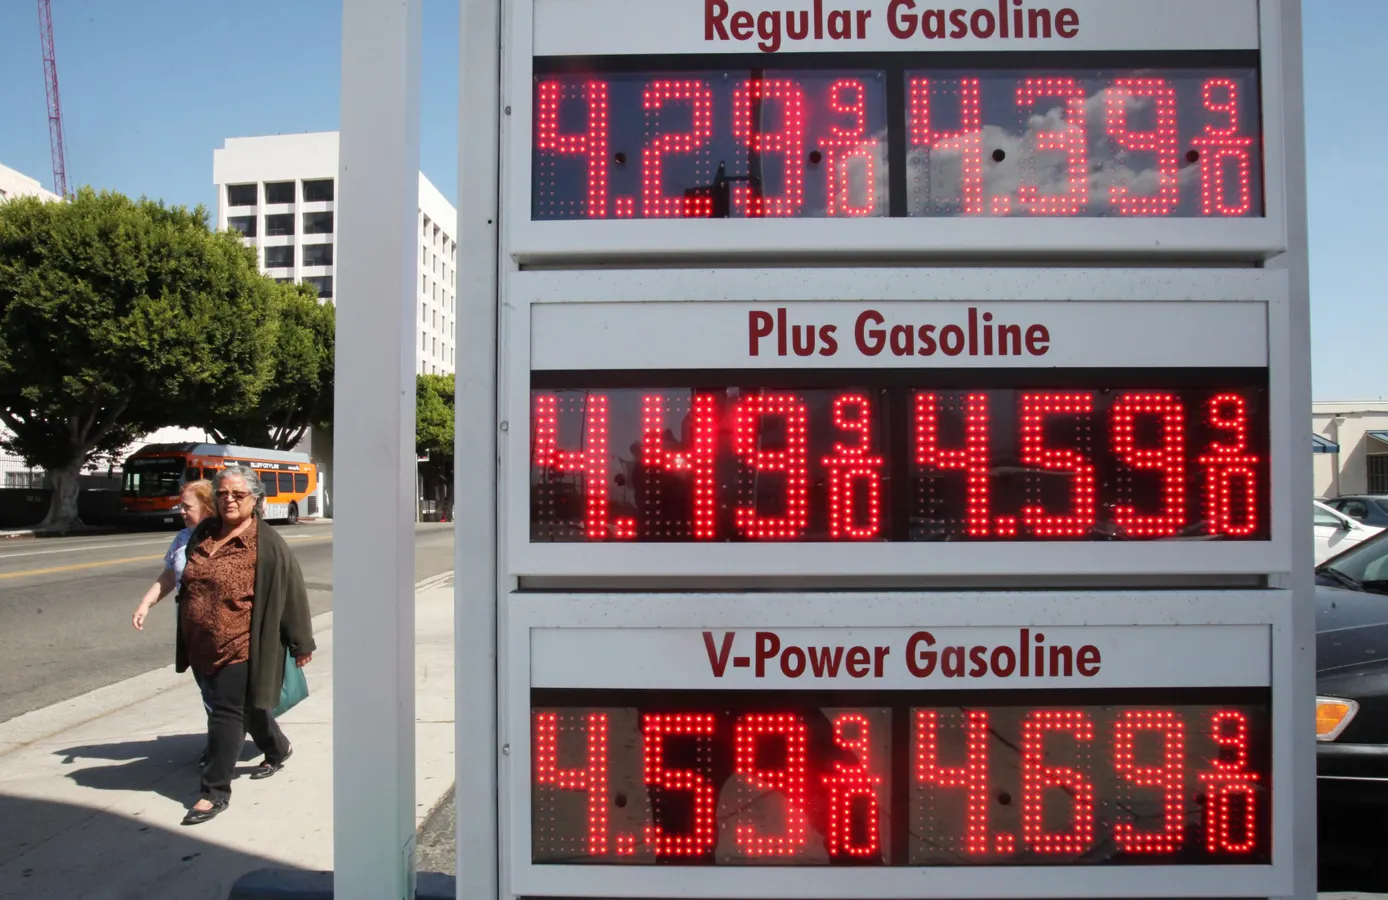 What Causes Gas Prices To Be Expressed As Fractions in the US?